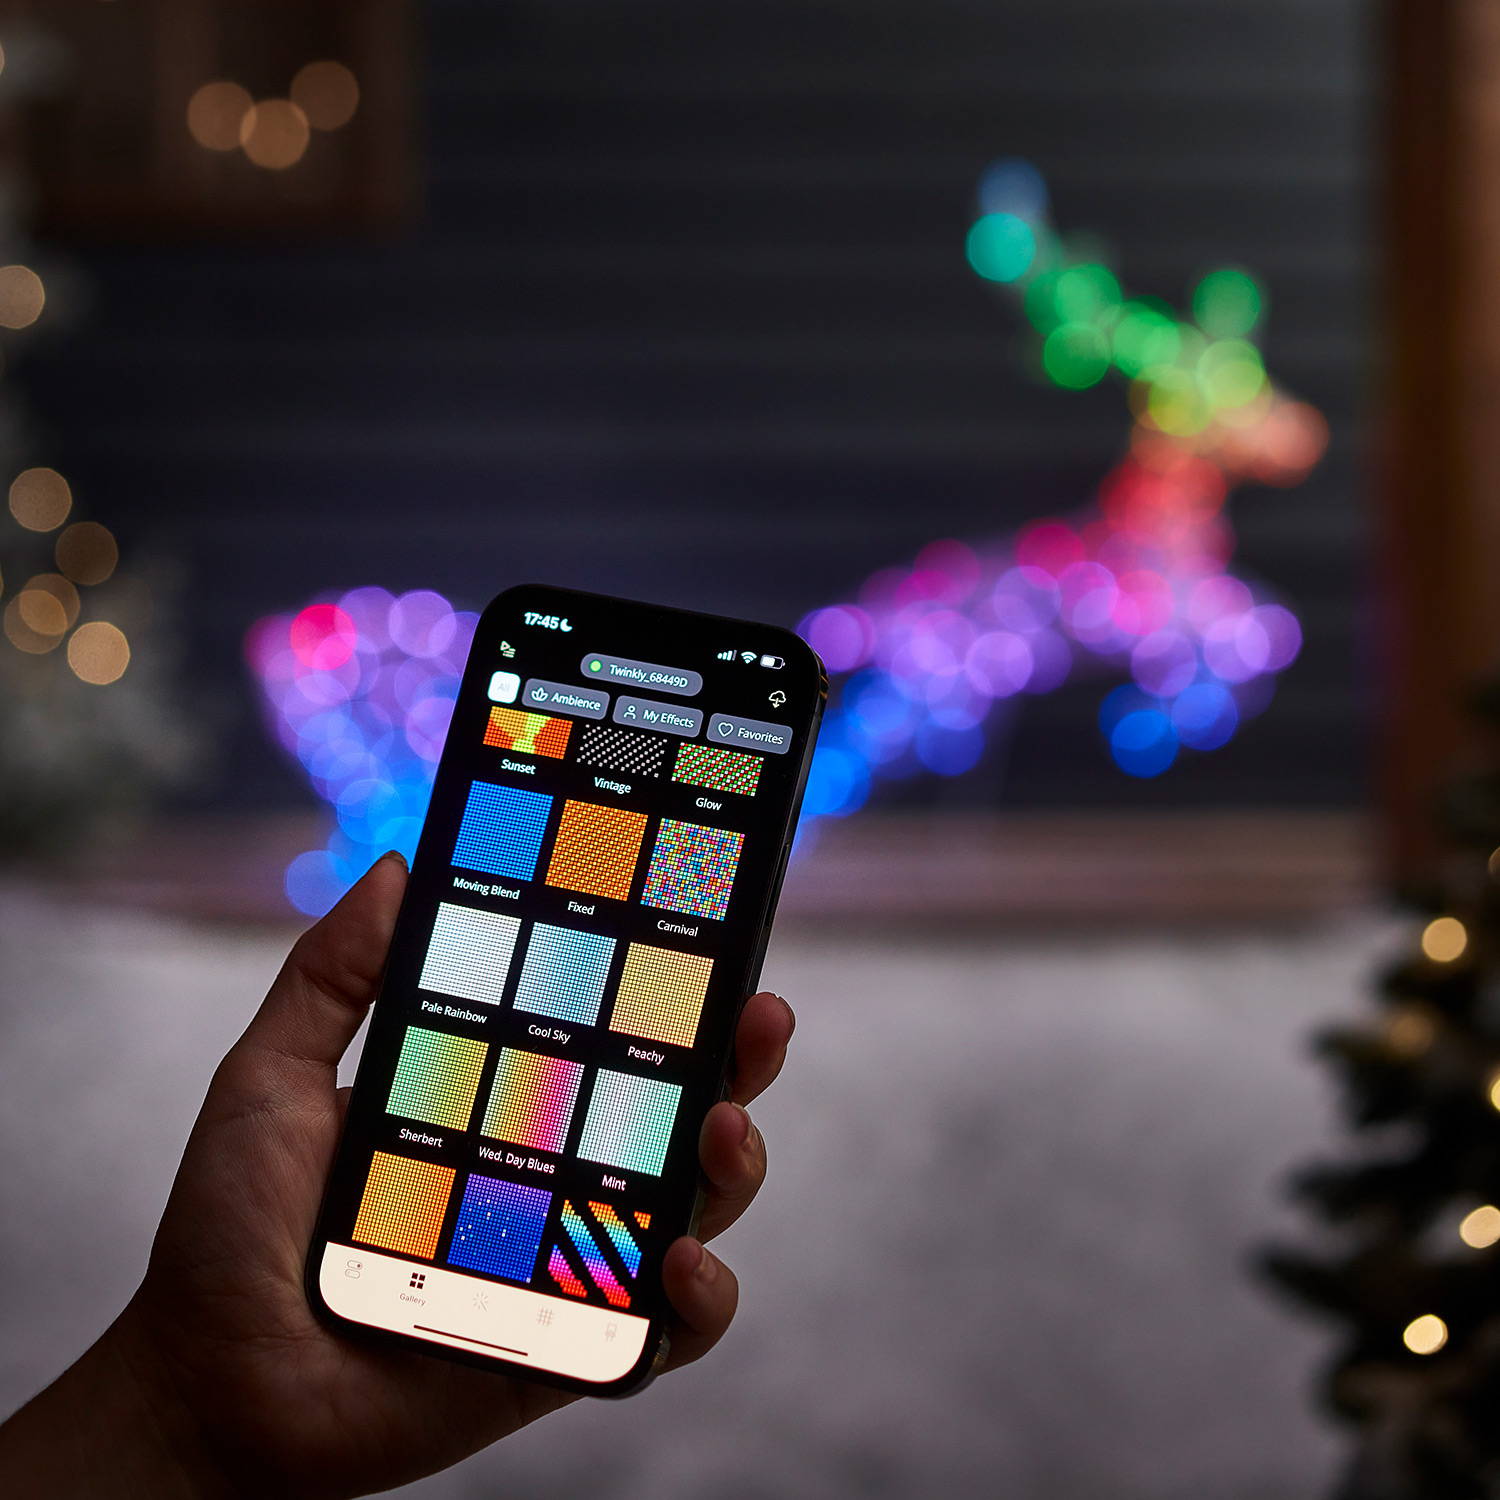 A phone screen with showing some of the effects and animations you can use to customise your reindeer.